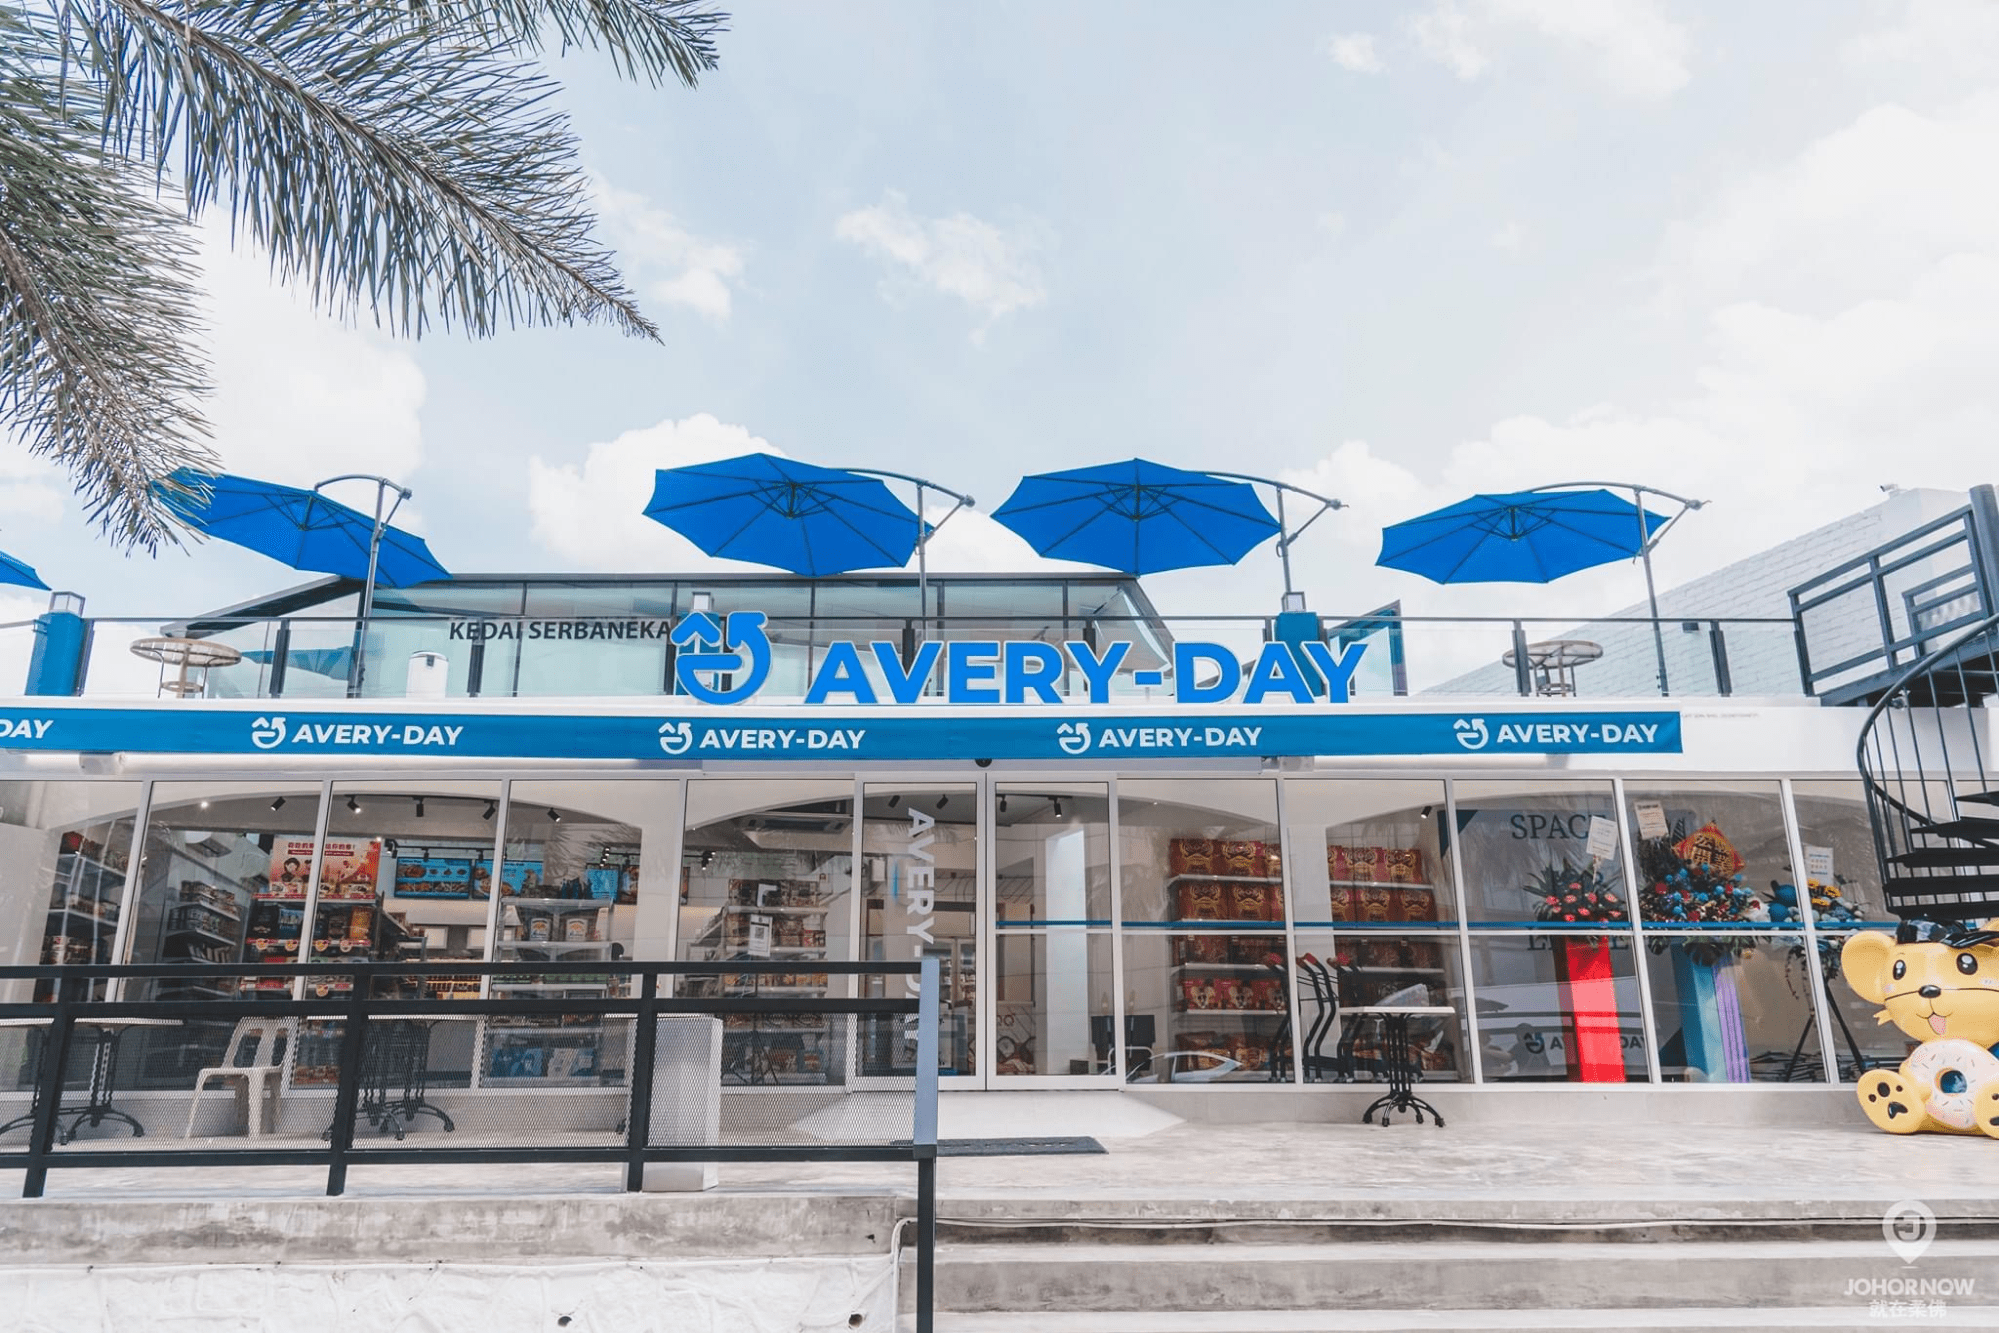 avery-day convenience store jb store front